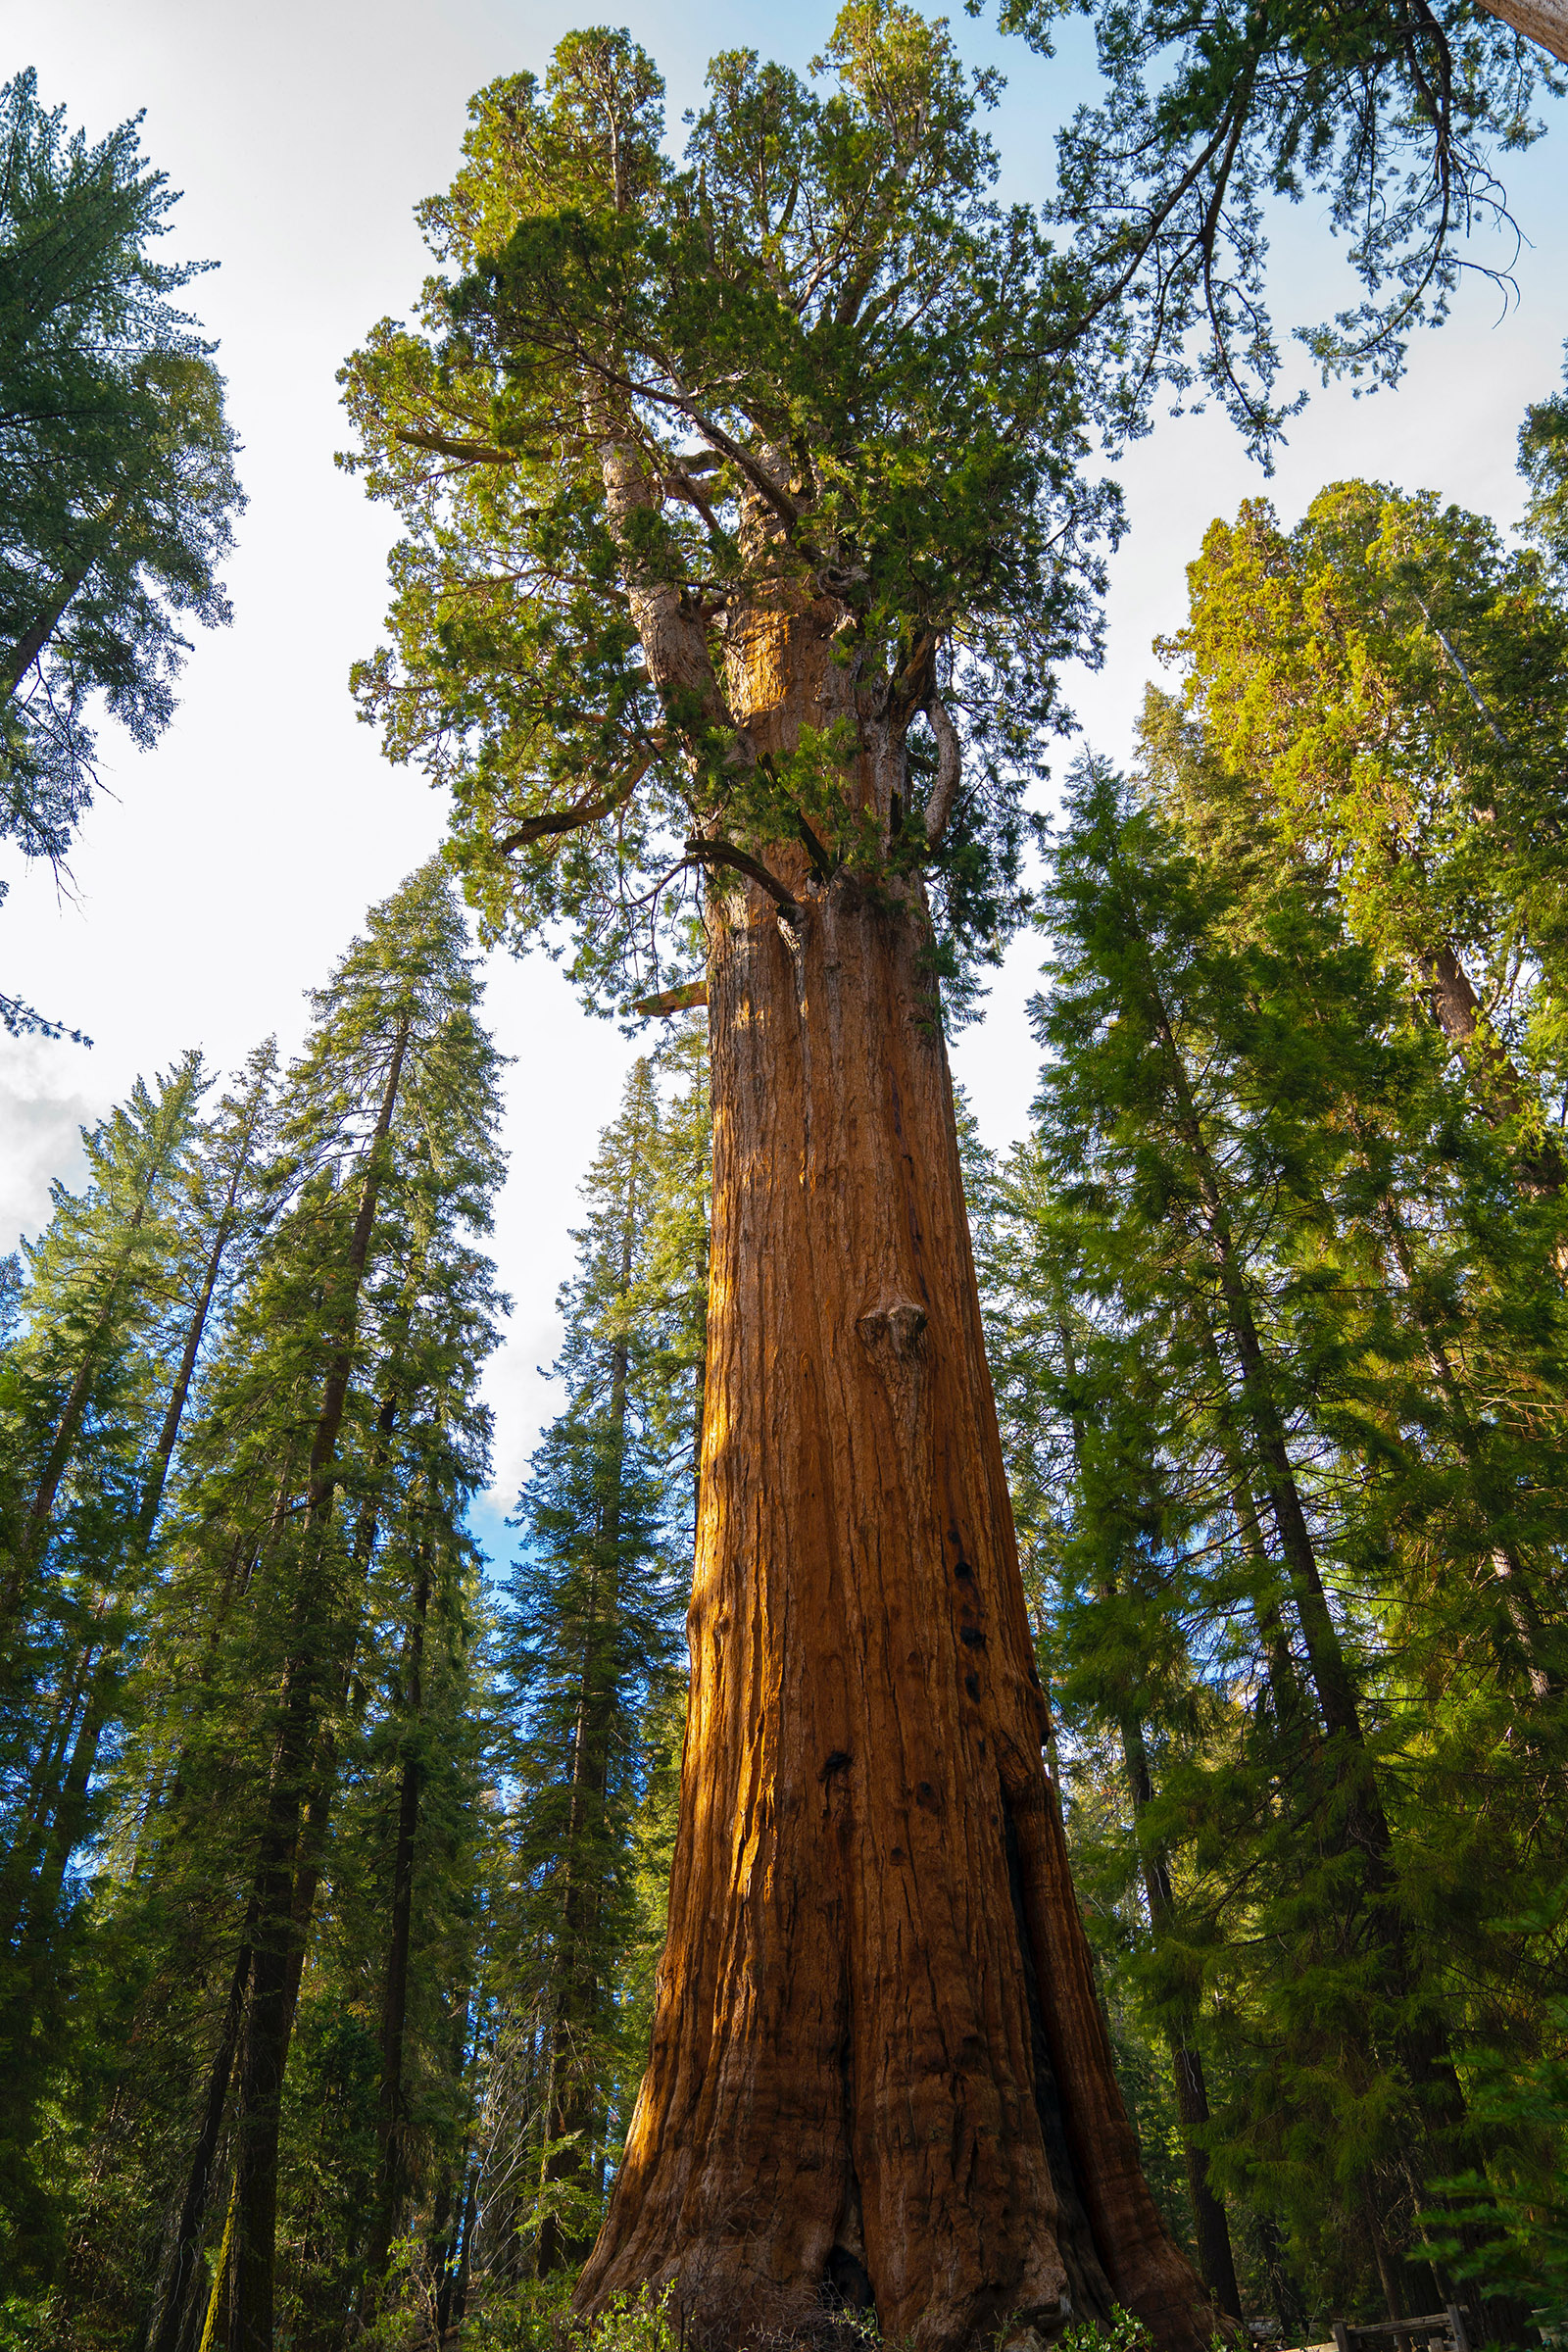 General Sherman, the largest single stem tree in the world, located in Sequoia National Park in California.